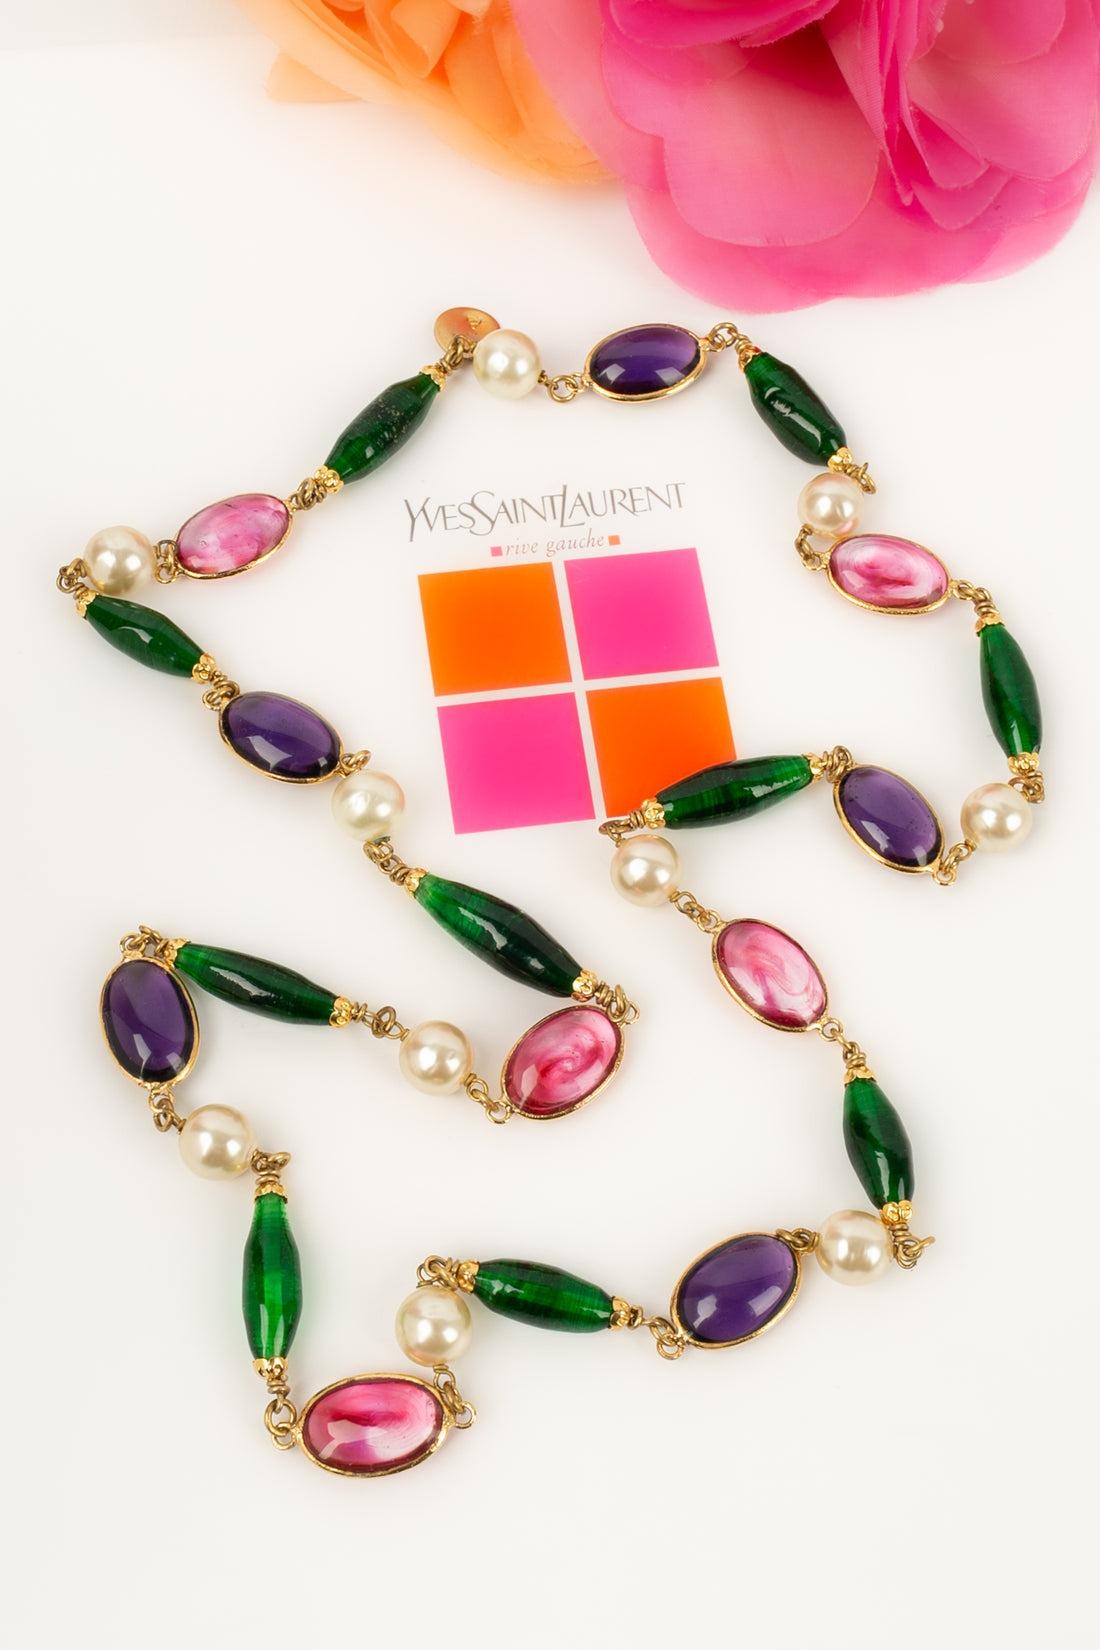 Yves Saint Laurent Necklace in Glass Paste and Pearly Beads For Sale 2